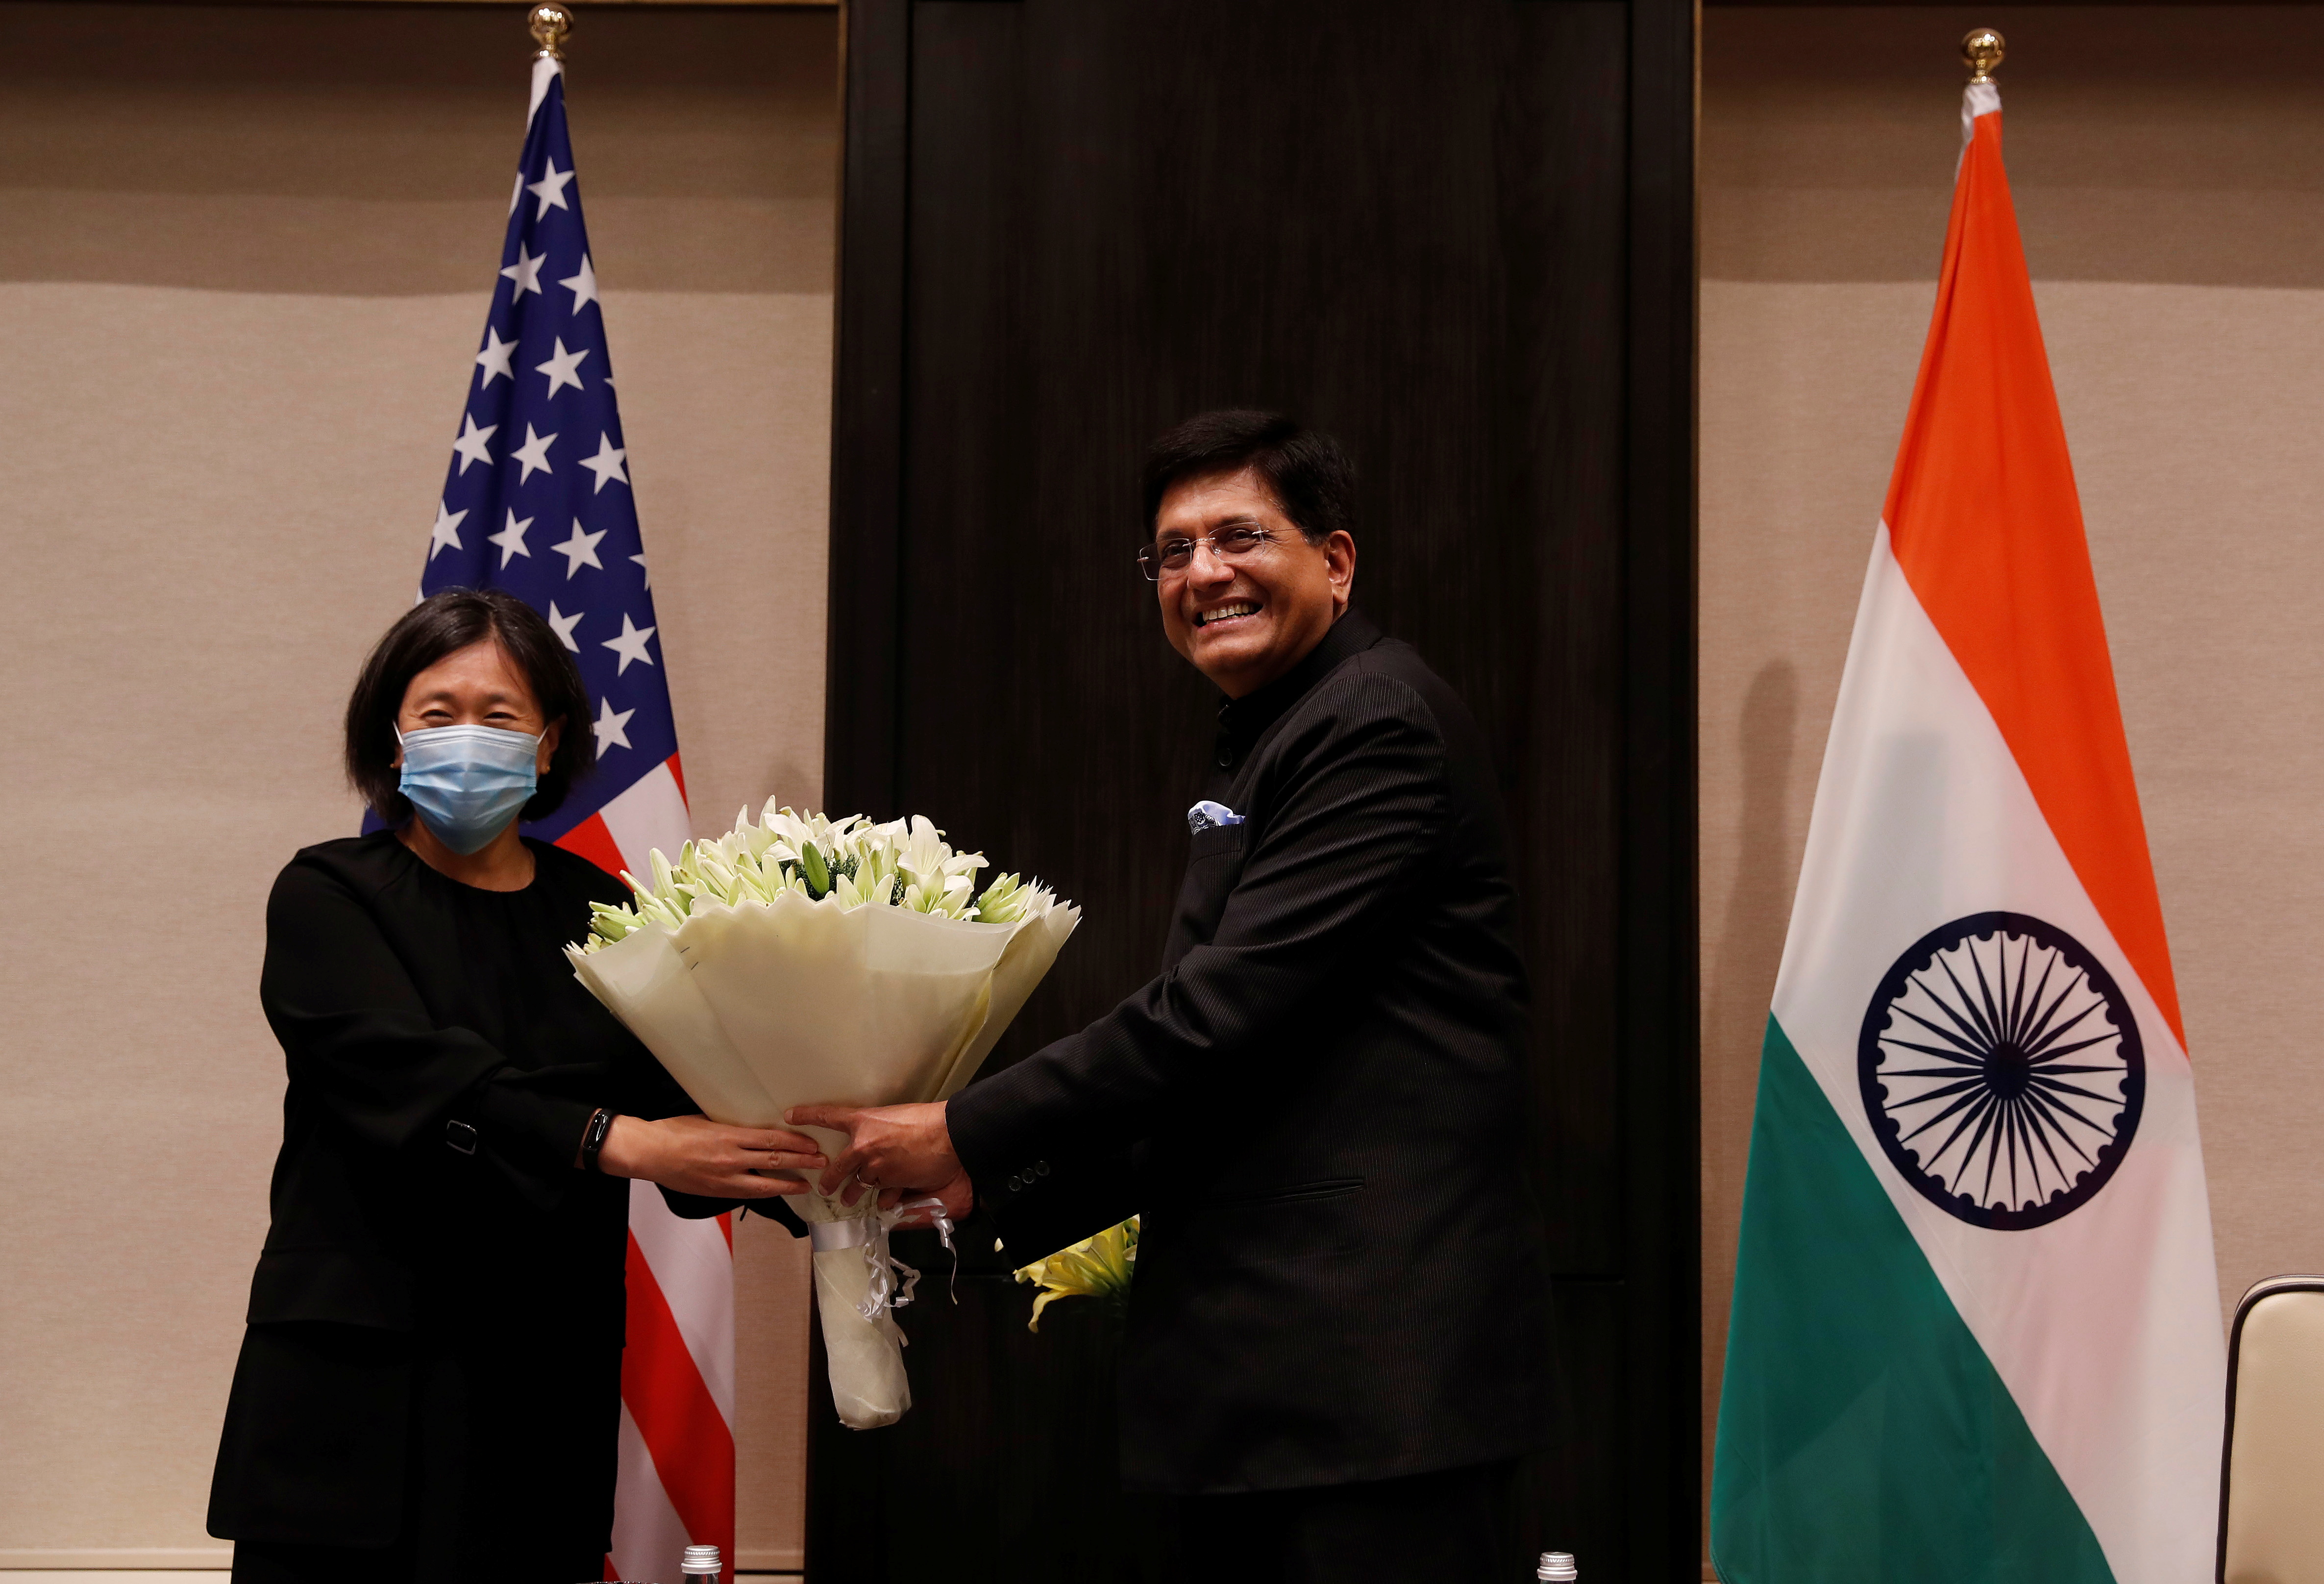 India's Minister of Commerce and Industry, Piyush Goyal, presents a bouquet to U.S. Trade Representative Katherine Tai before start of their meeting in New Delhi